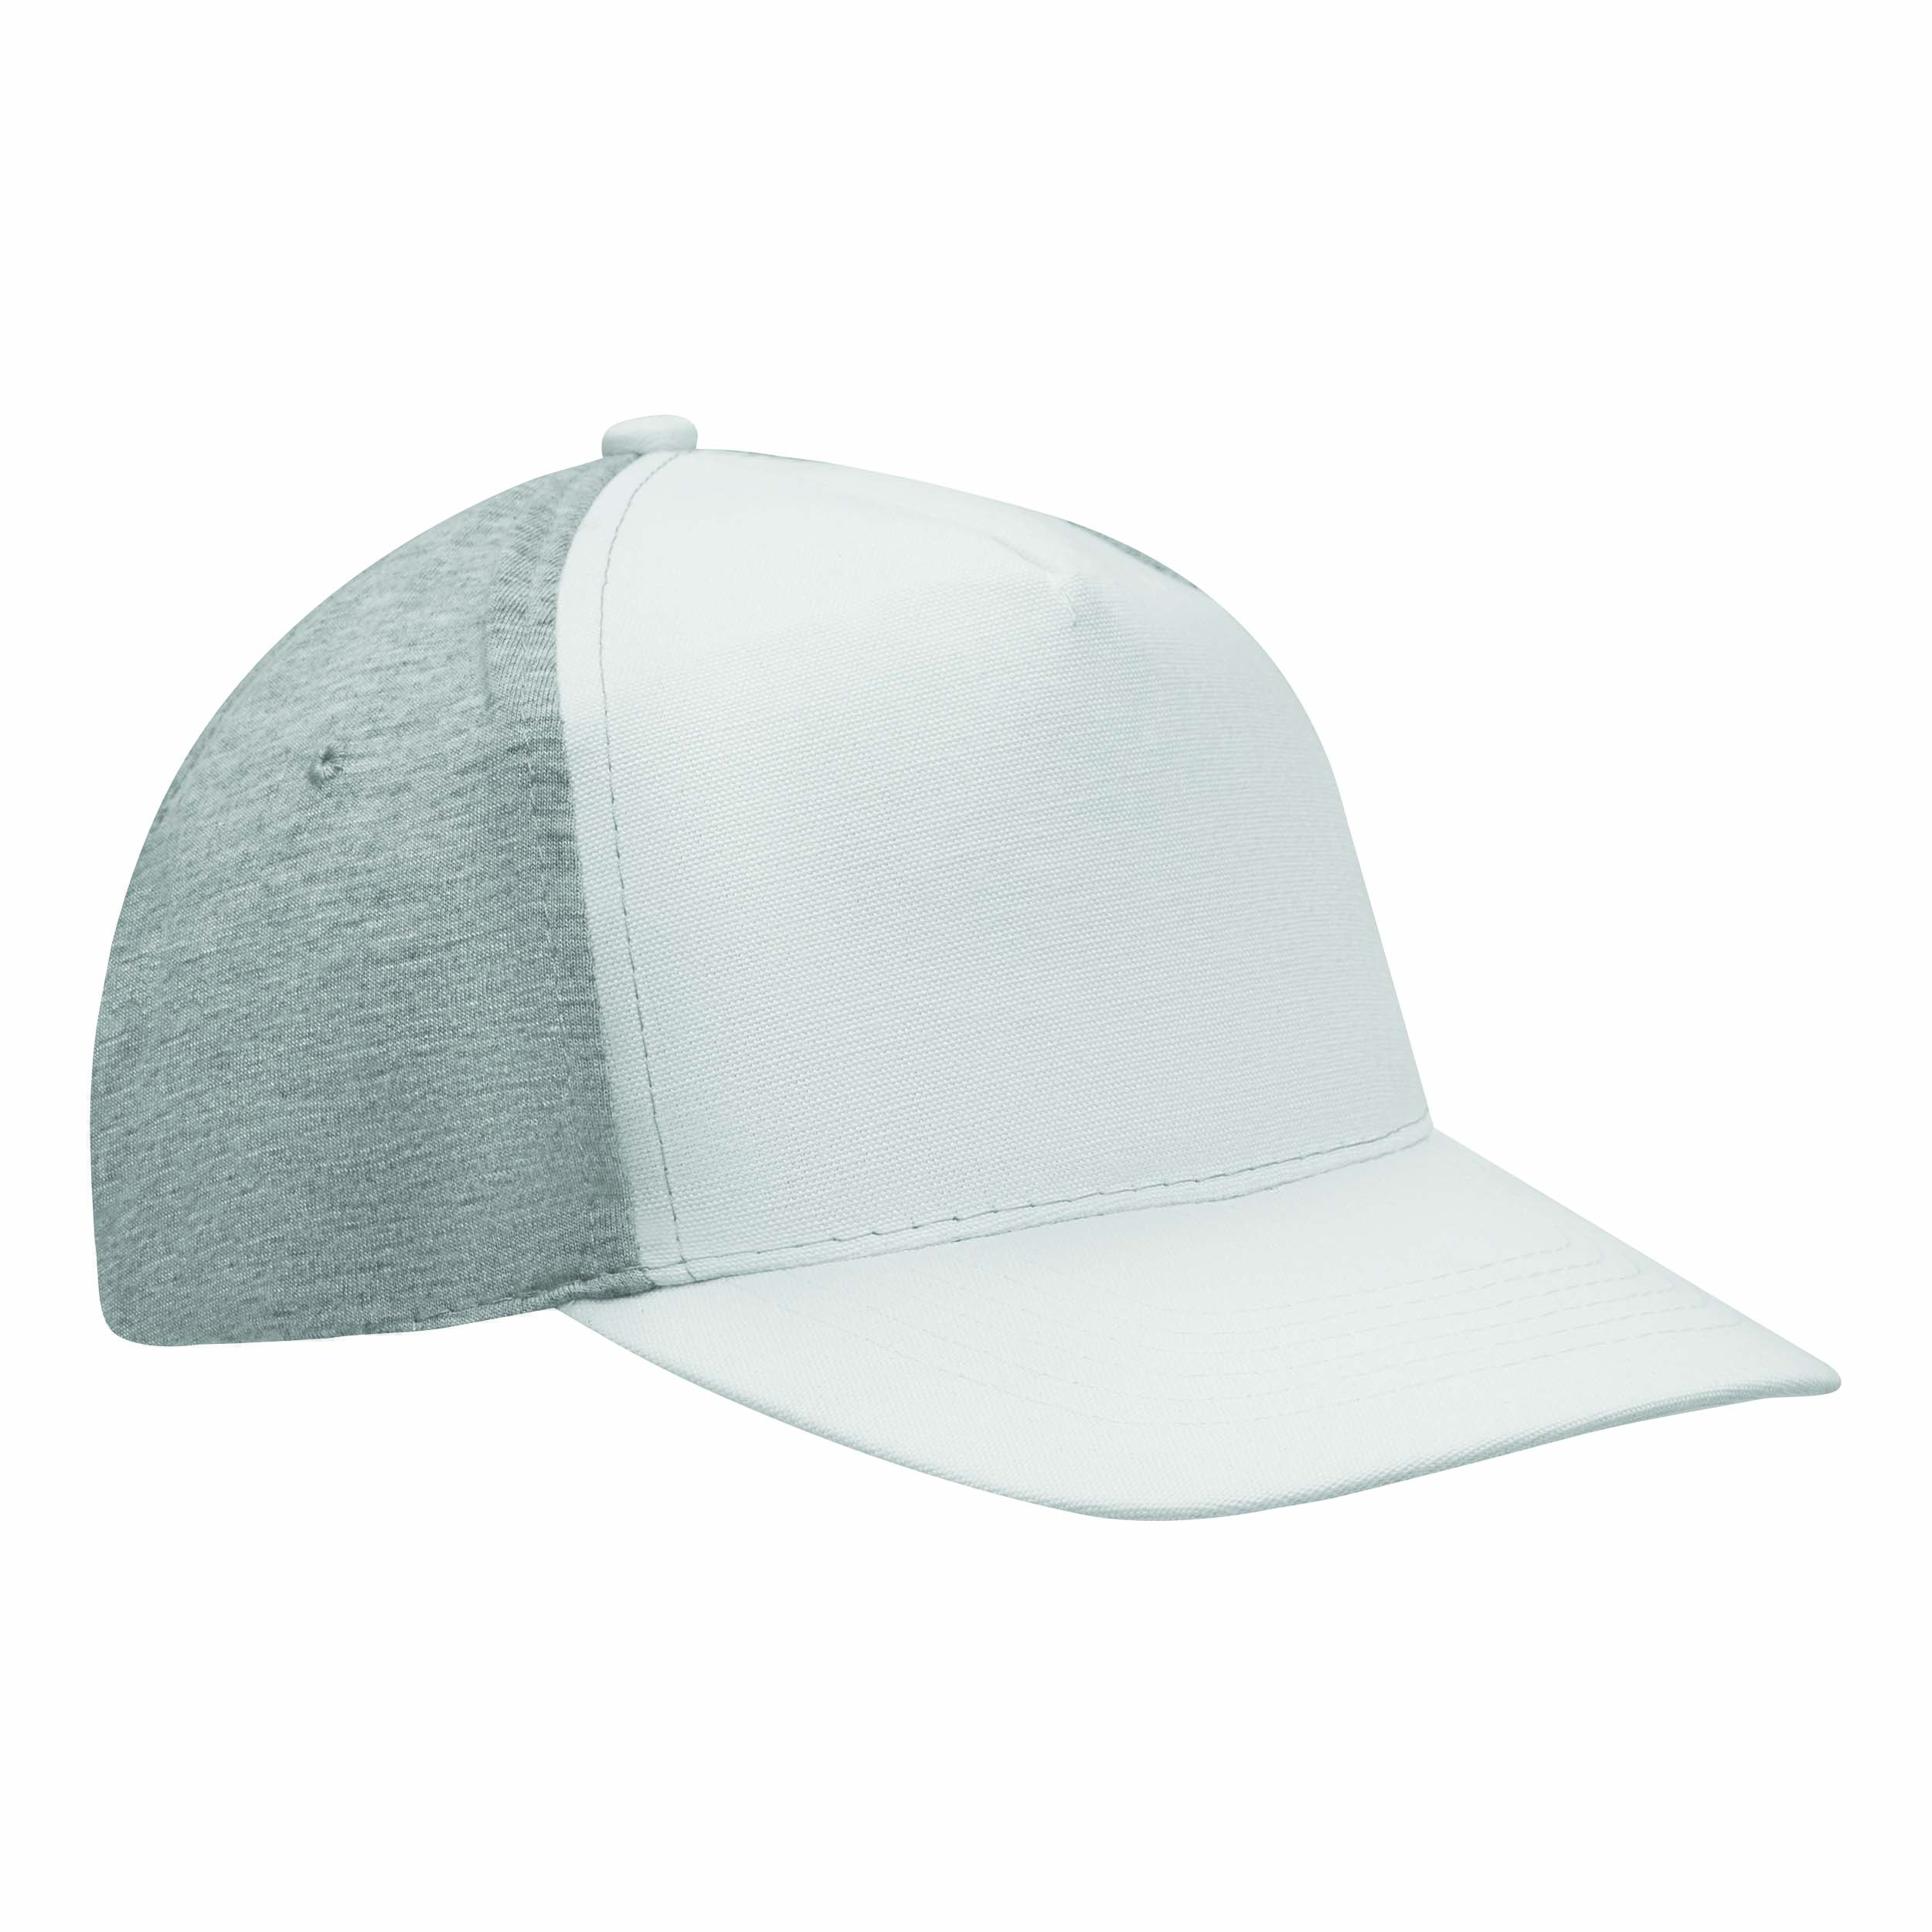 5-Panel-Baseball-Cap UP TO DATE 56-0701600